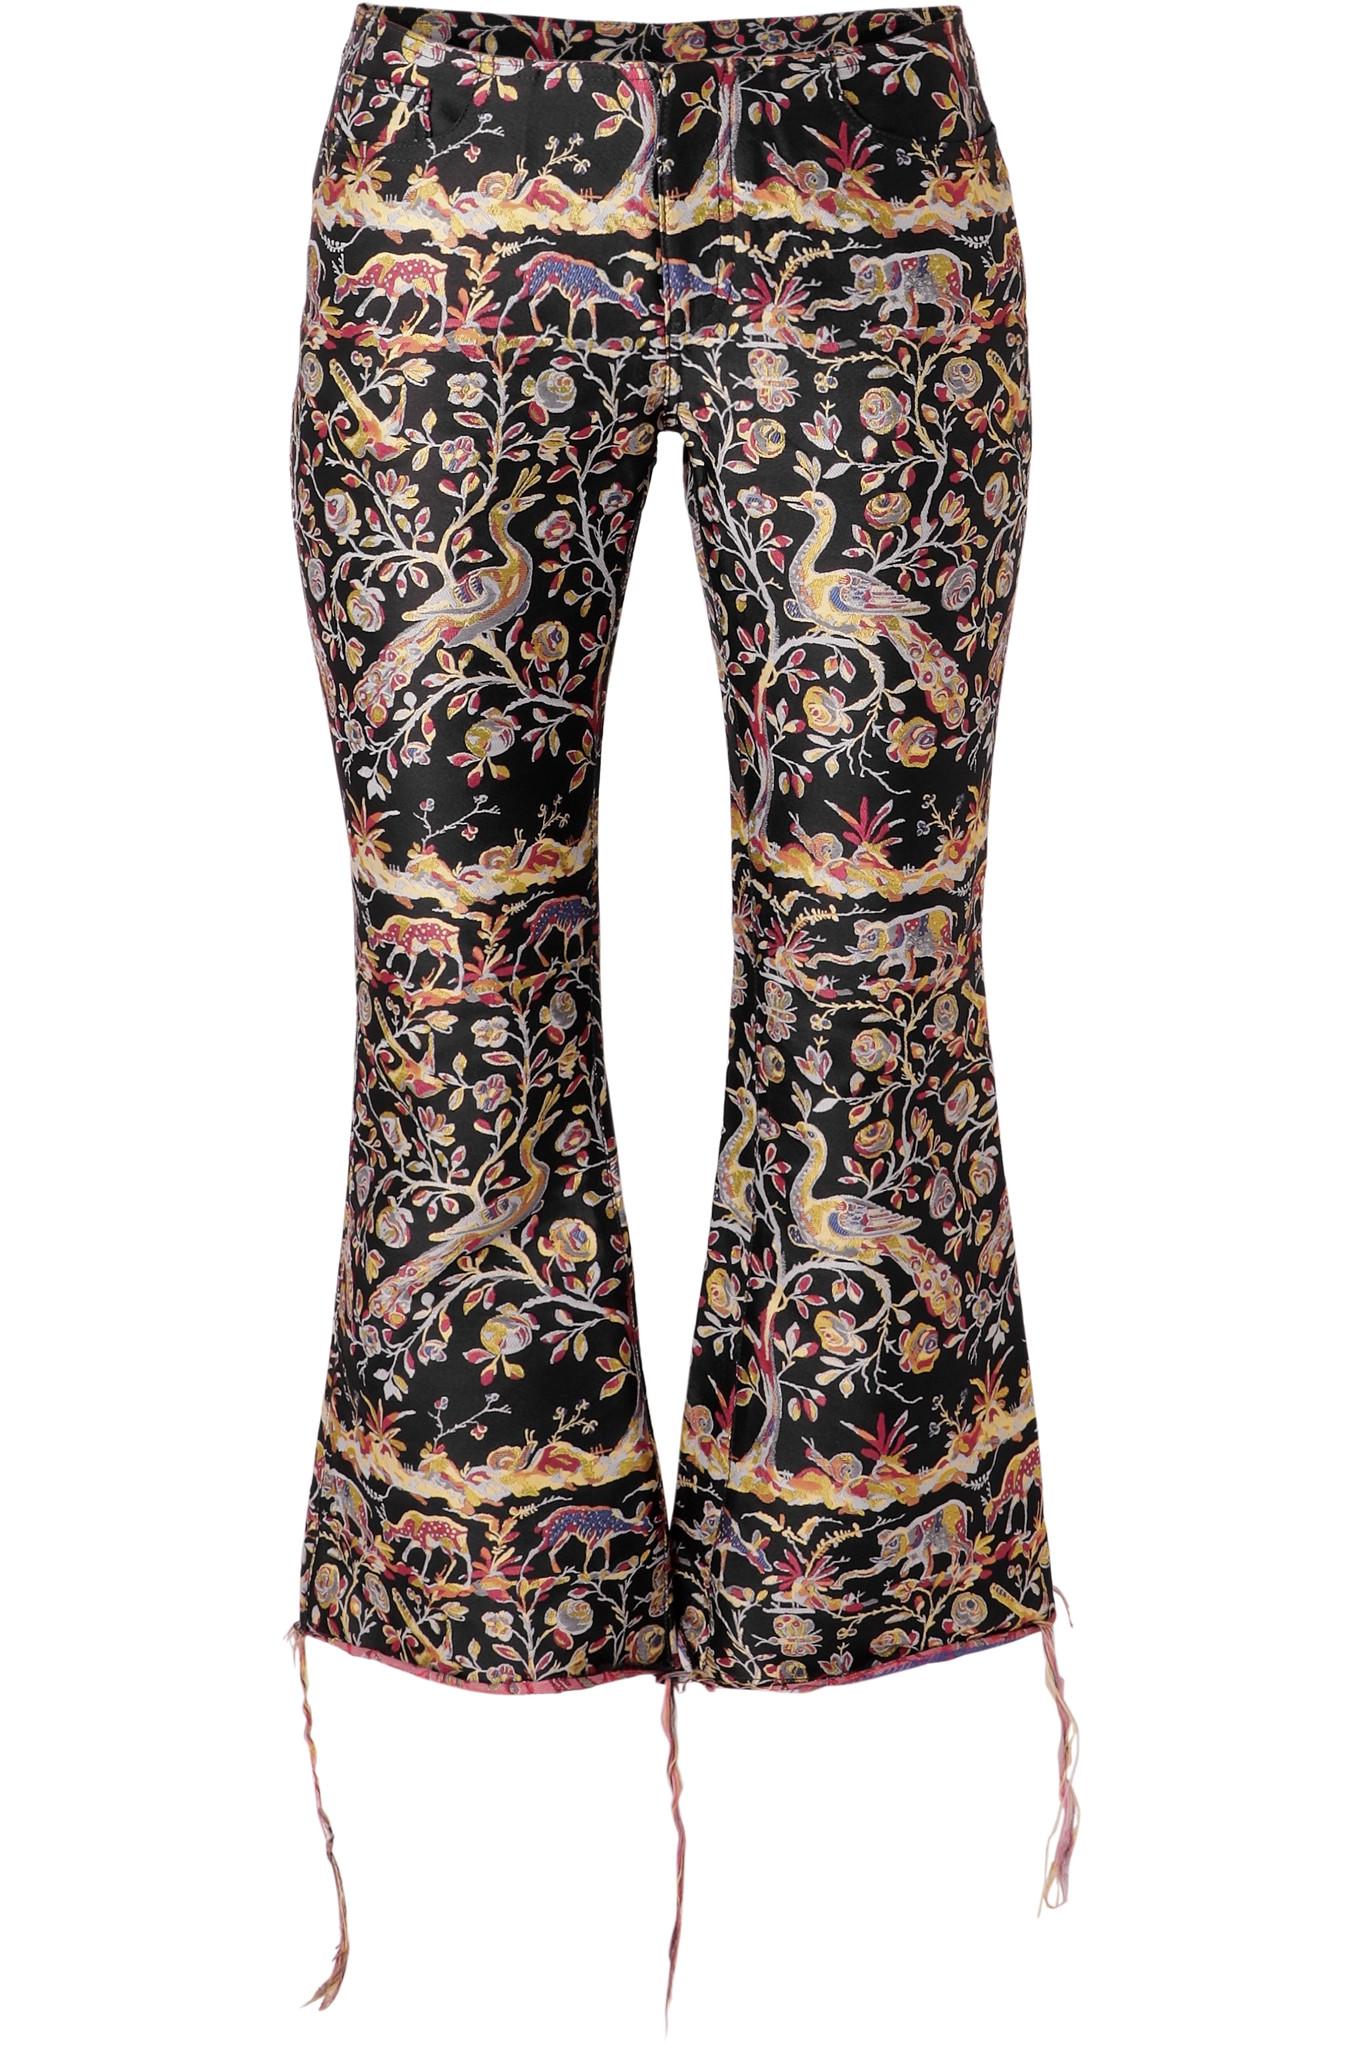 Lyst - Marques'Almeida Cropped Frayed Brocade Flared Pants in Black